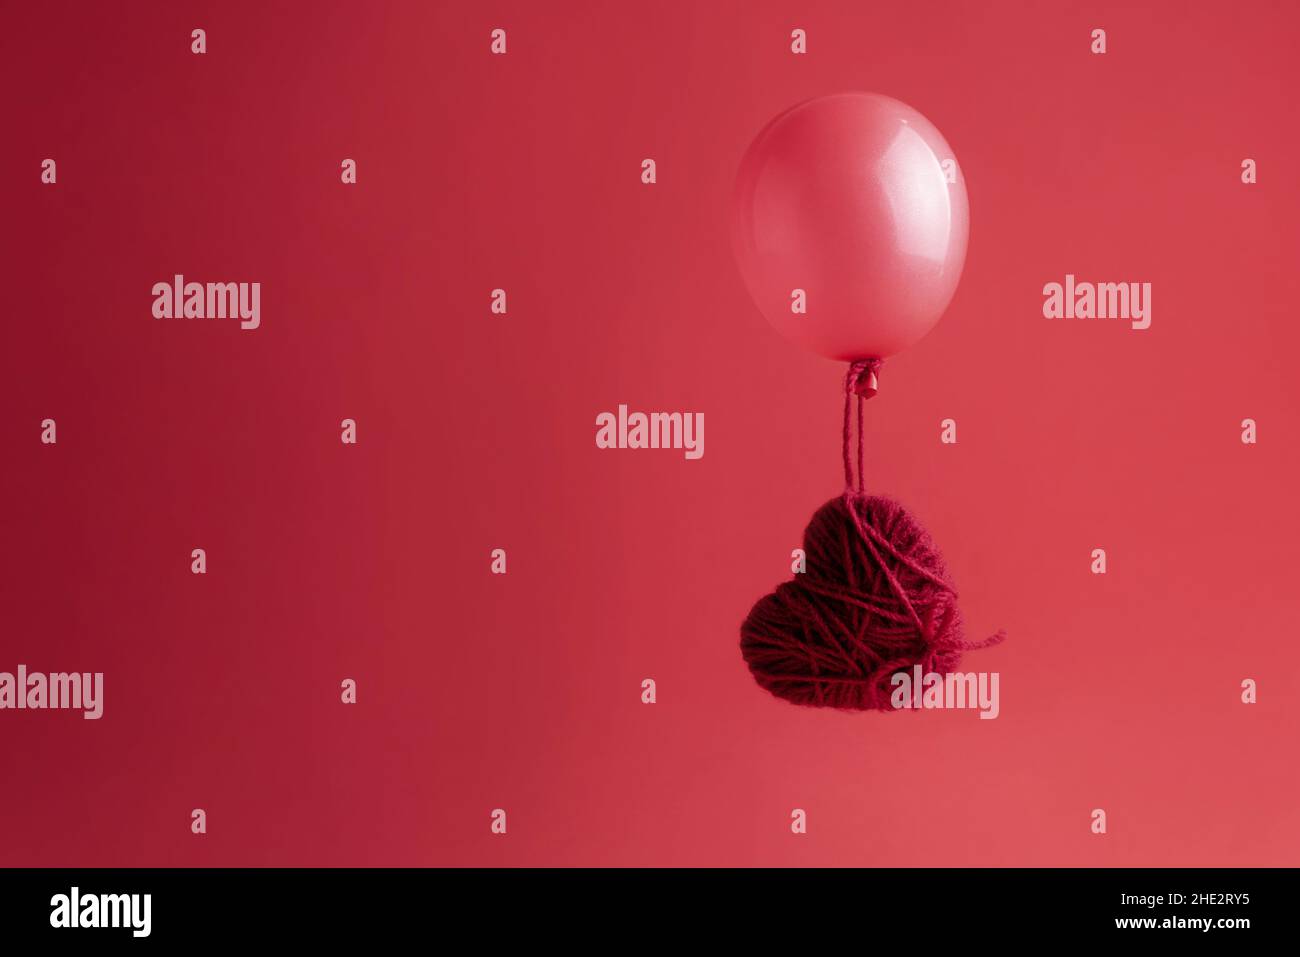 Heart of yarn flying in a balloon on a red background, Valentine's Day greeting card. Stock Photo